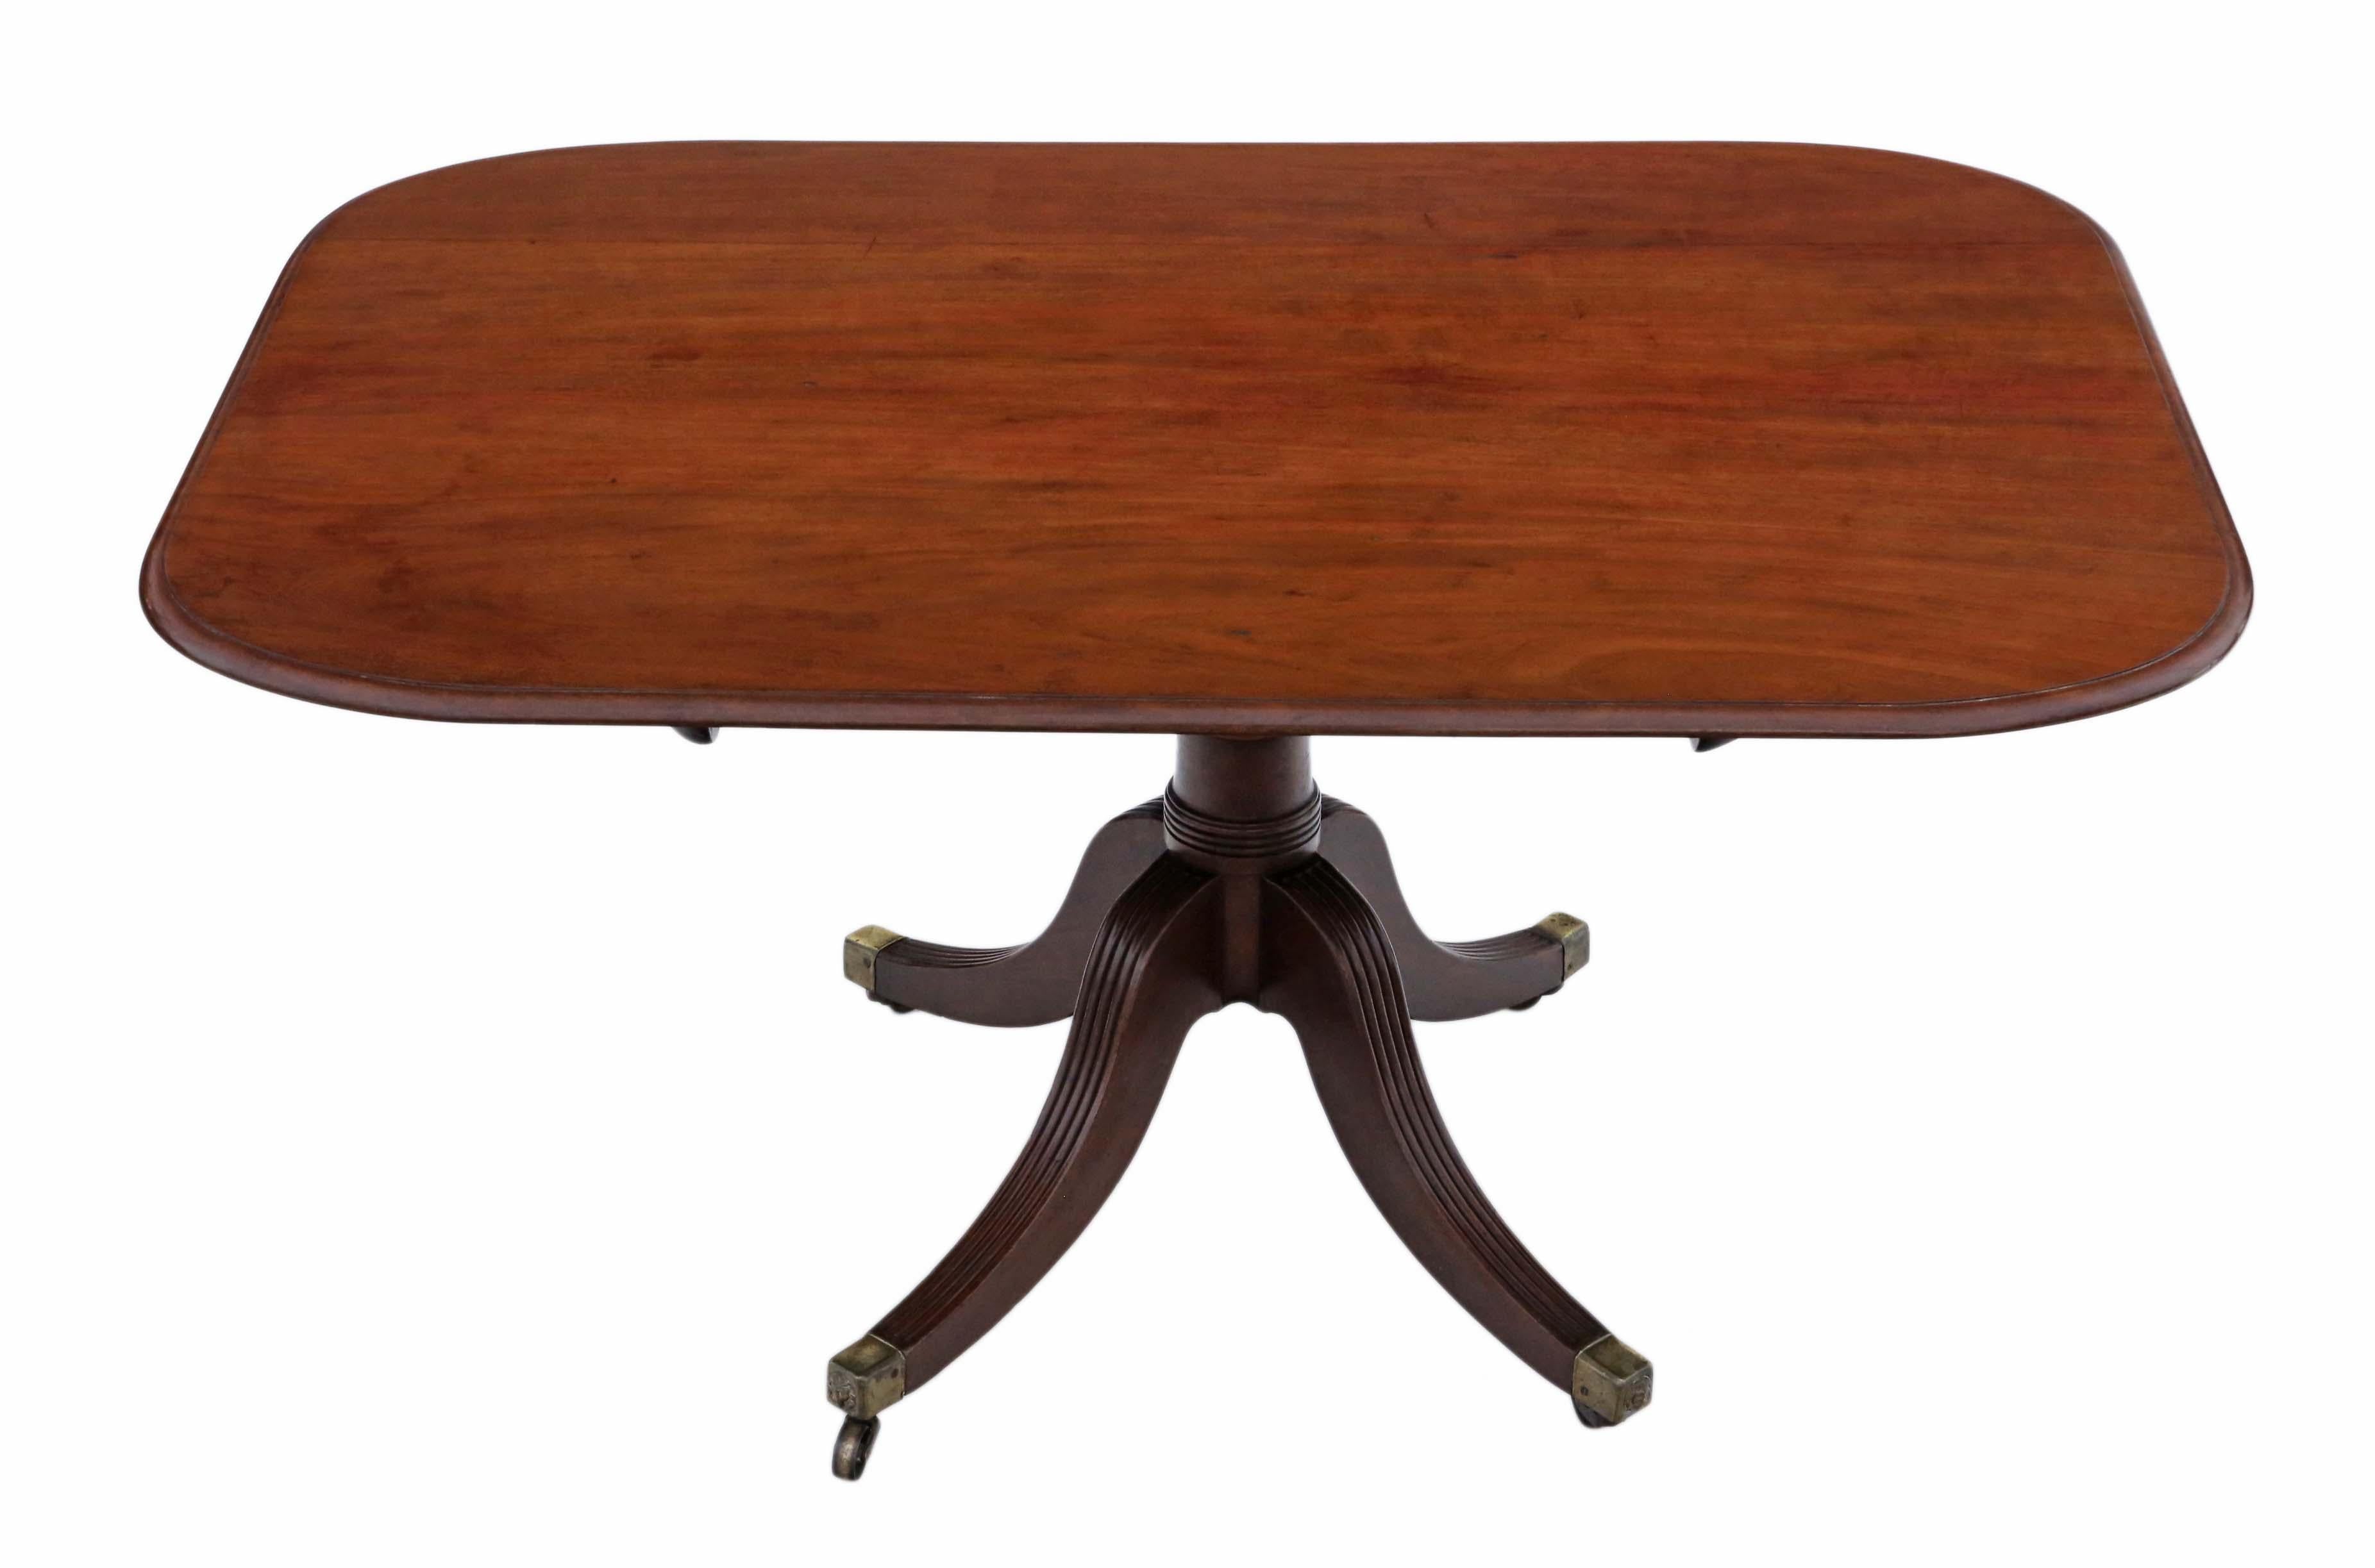 Antique Regency Mahogany Loo Breakfast Centre Table Tilt Top In Good Condition For Sale In Wisbech, Cambridgeshire